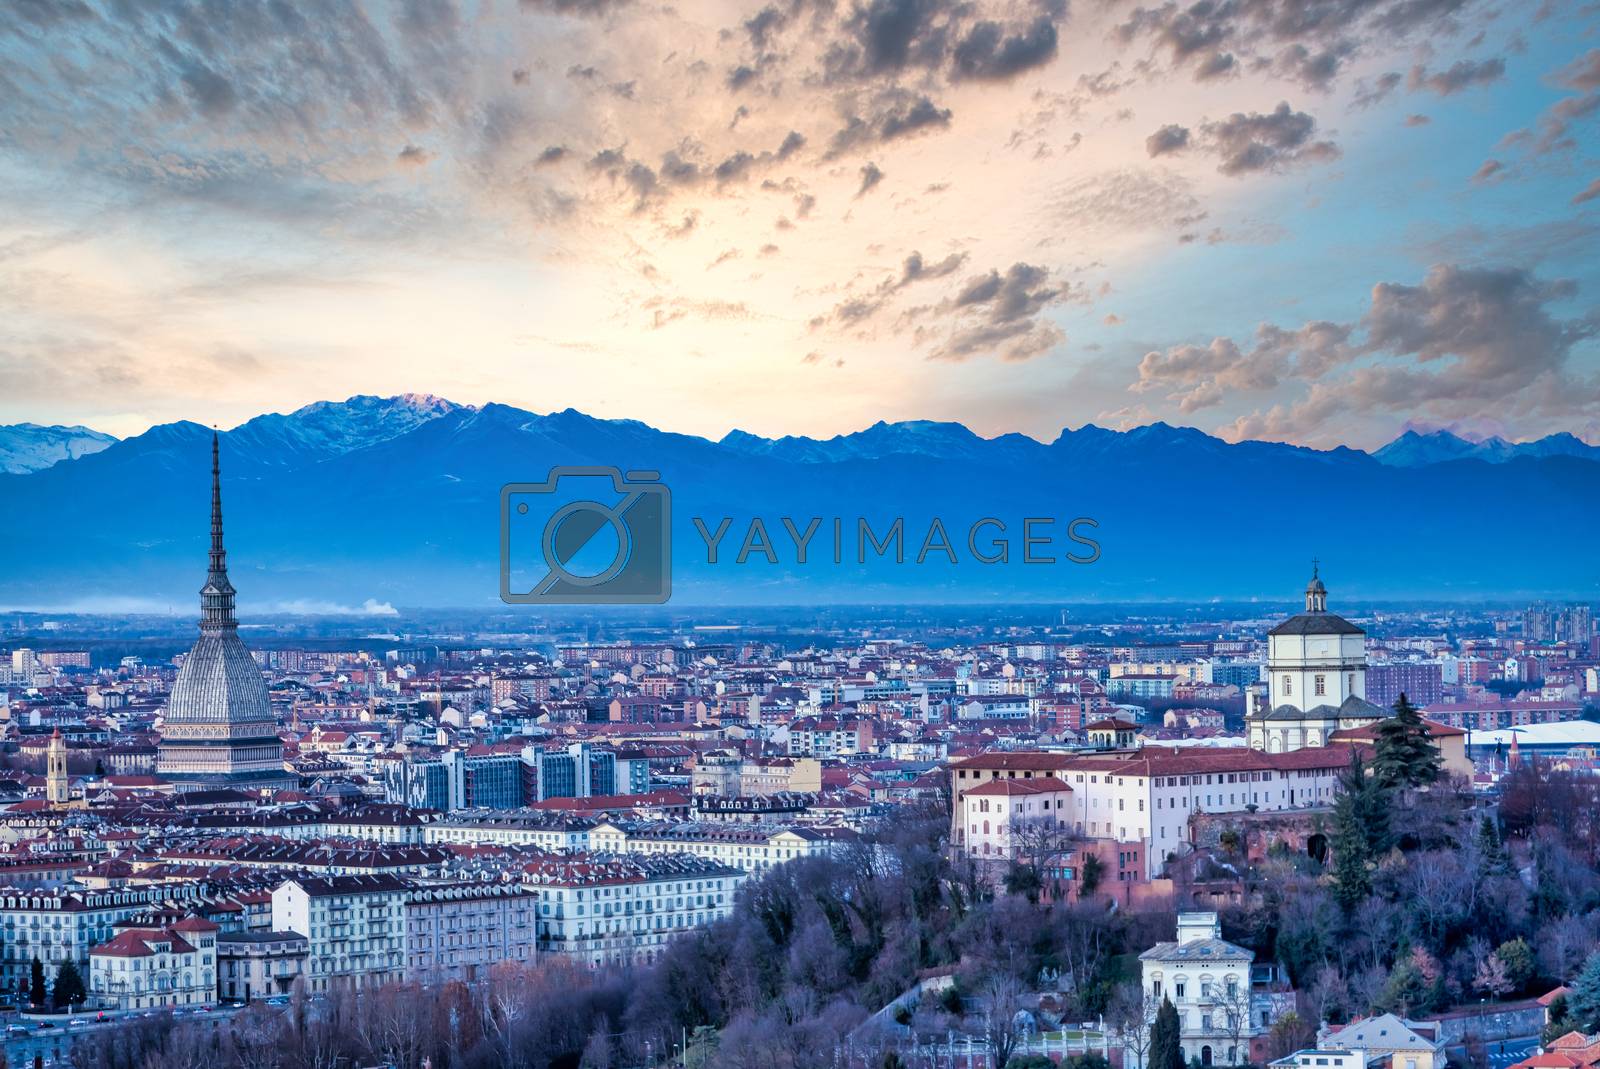 Royalty free image of Turin panoramic skyline at sunset with Alps in background by Perseomedusa